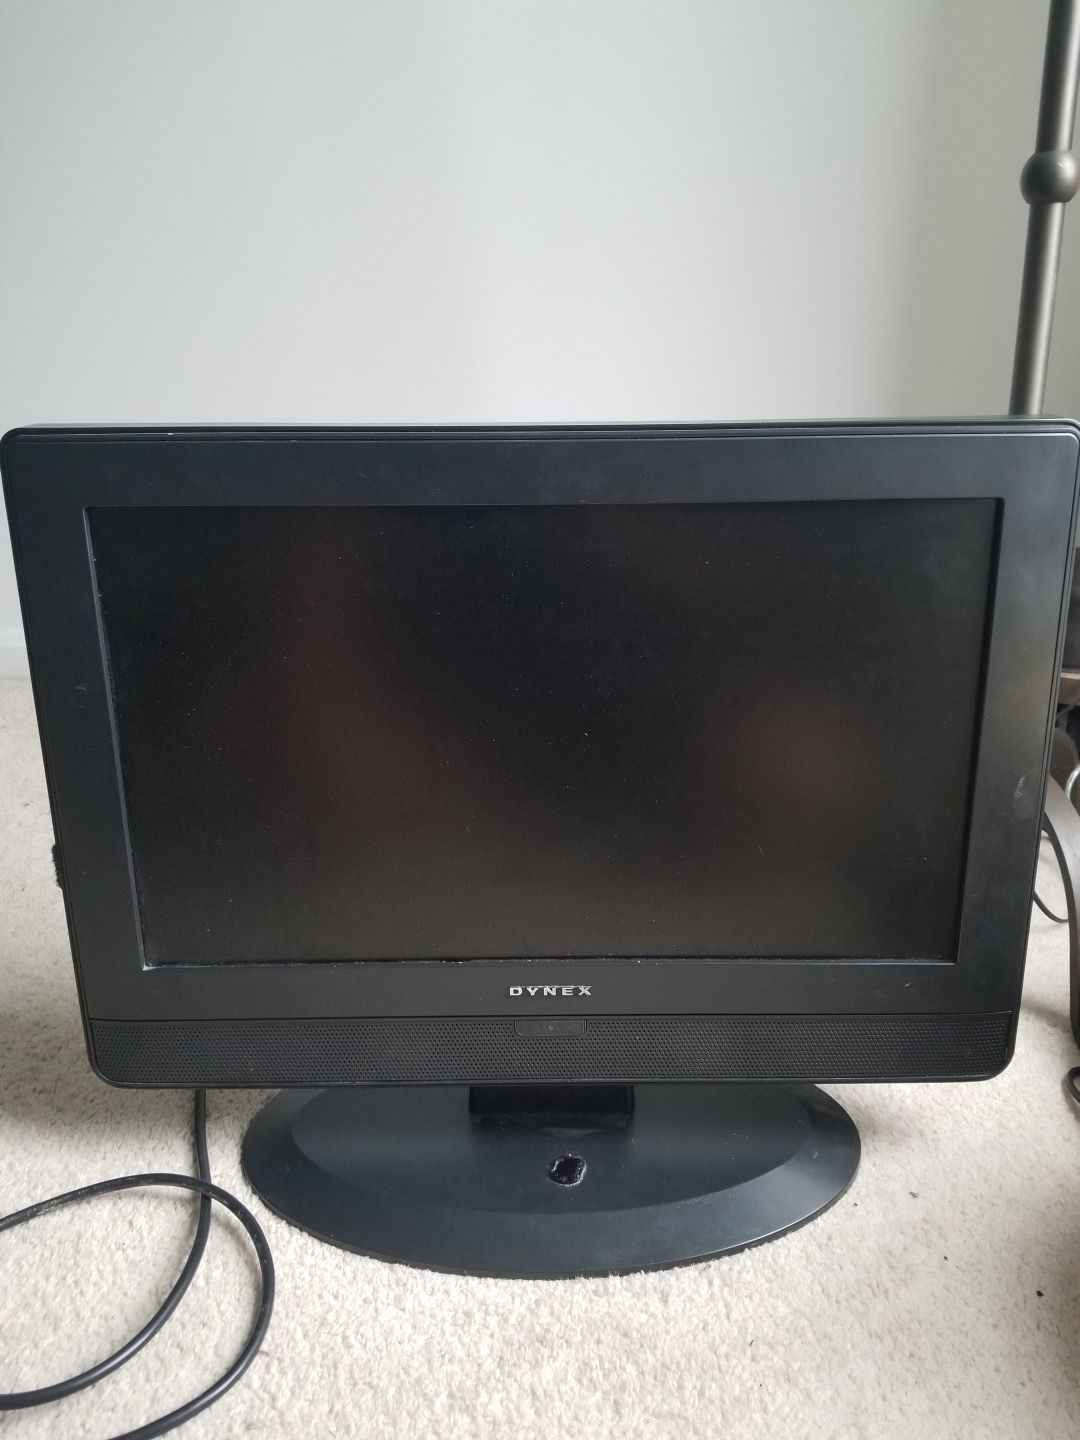 Dynex TV and PC monitor